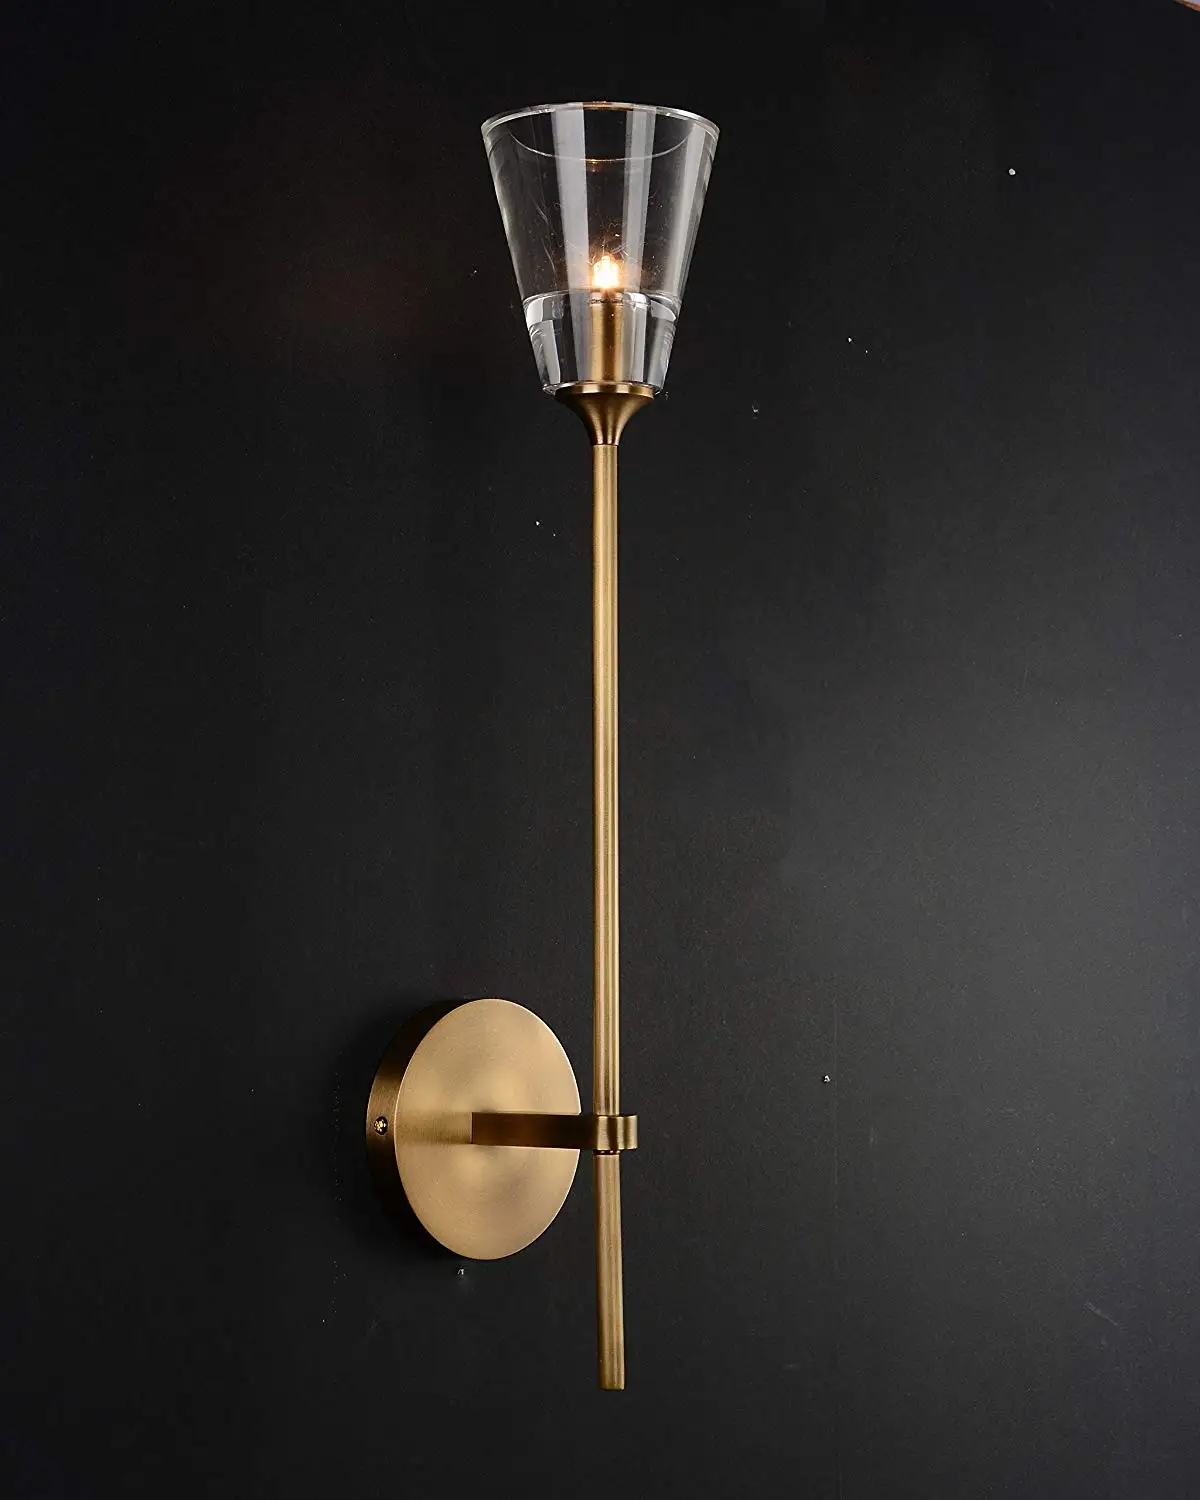 MEEROSEE Unique Design Decorative Wall Sconce Lighting Long Iron Lamp Holder Wall Bracket Light for Aisle Corridor Porch MD86715